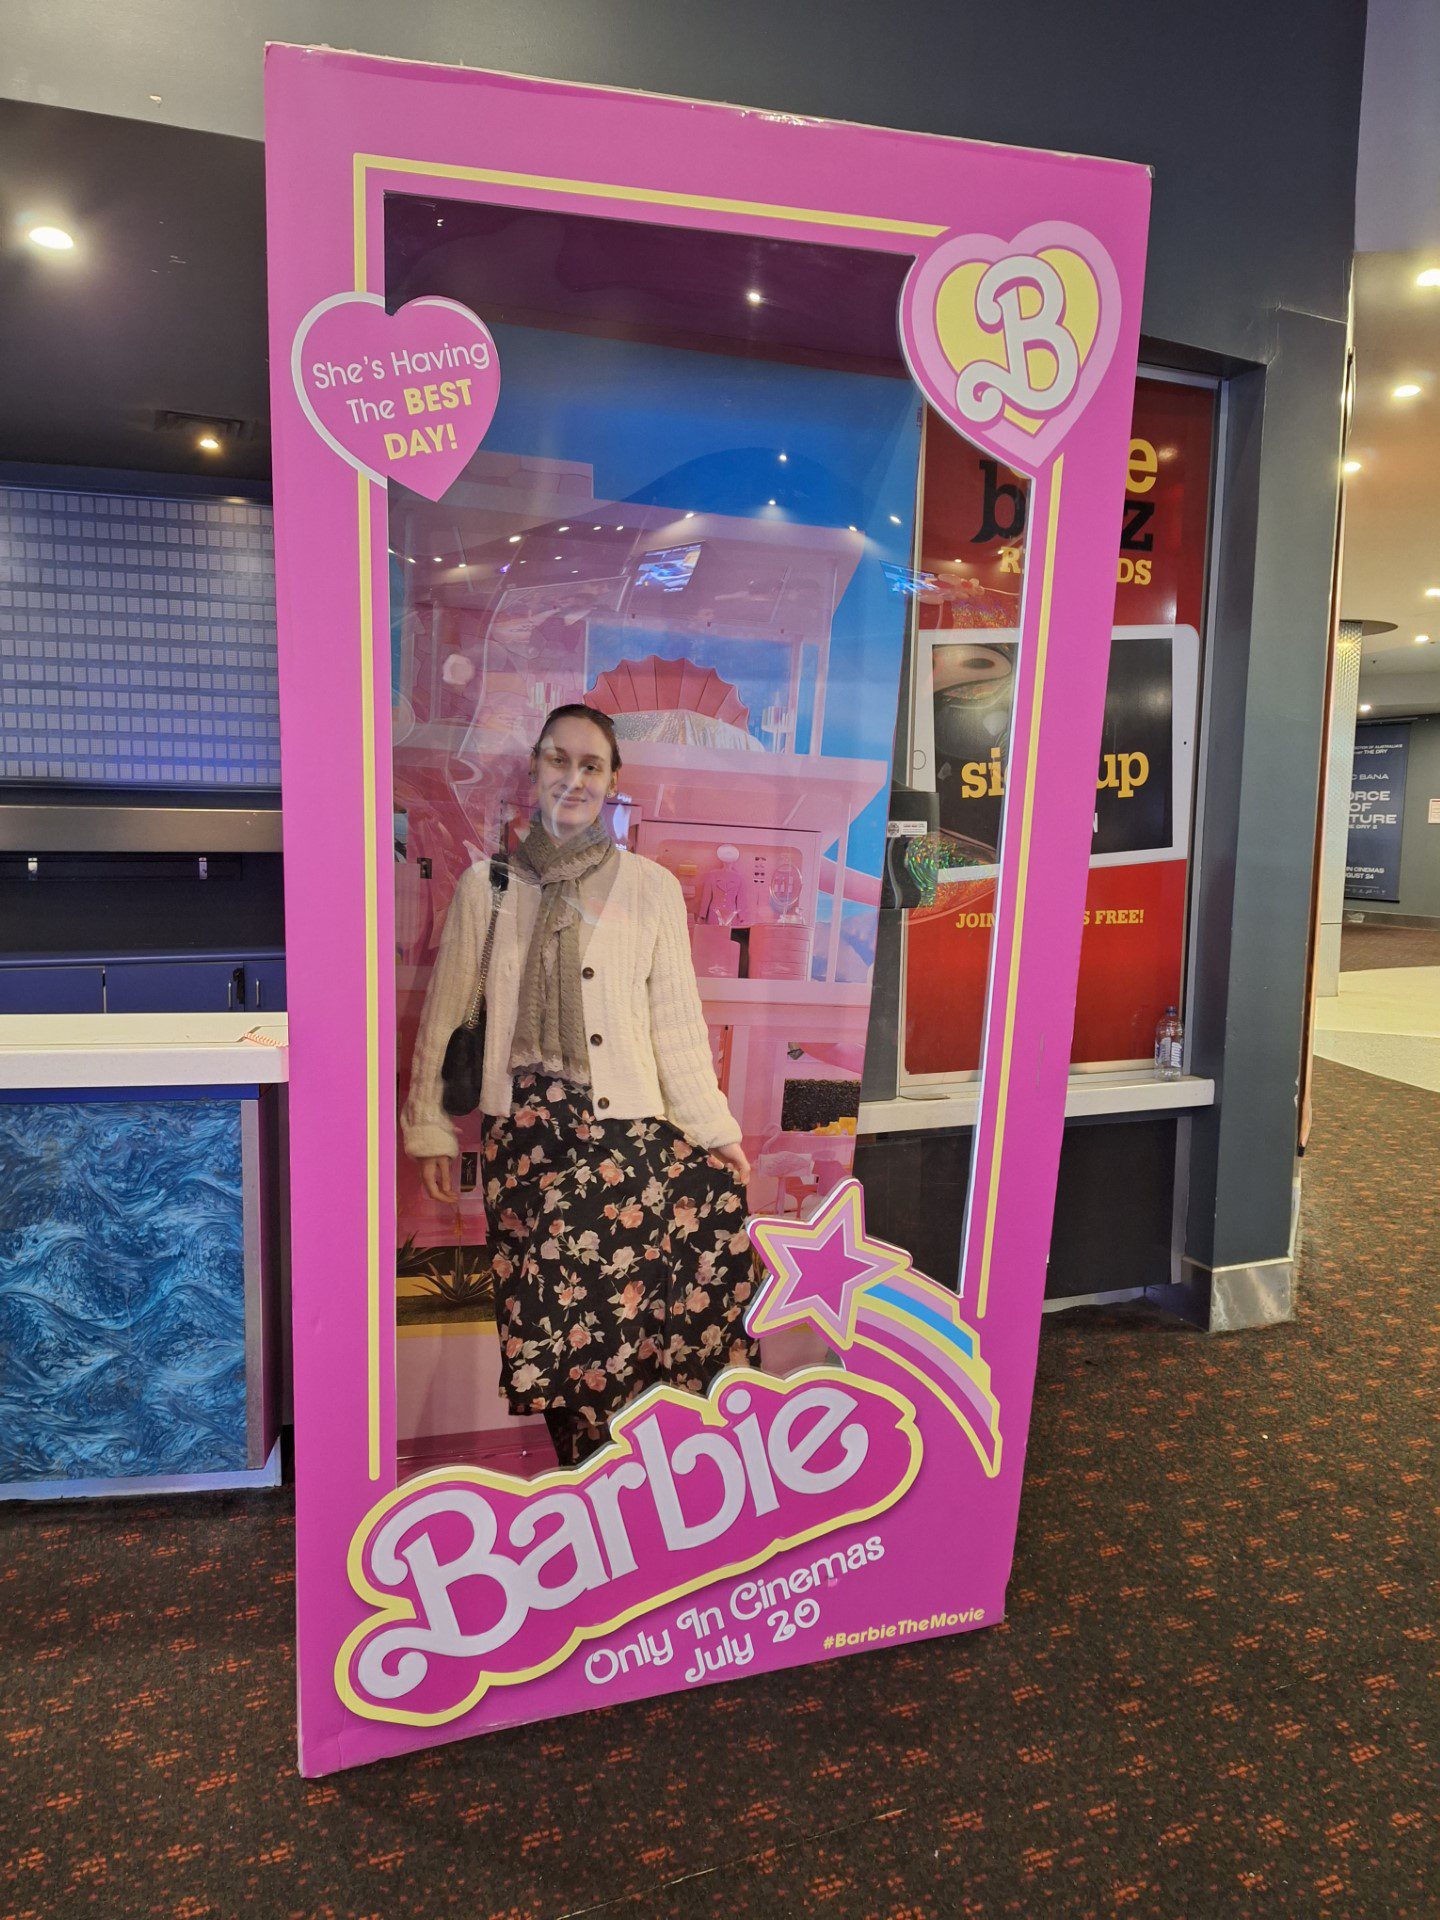 A List Socialite Suzanna going to the Barbie movie. Standing in the Barbie cutout frame at the cinema